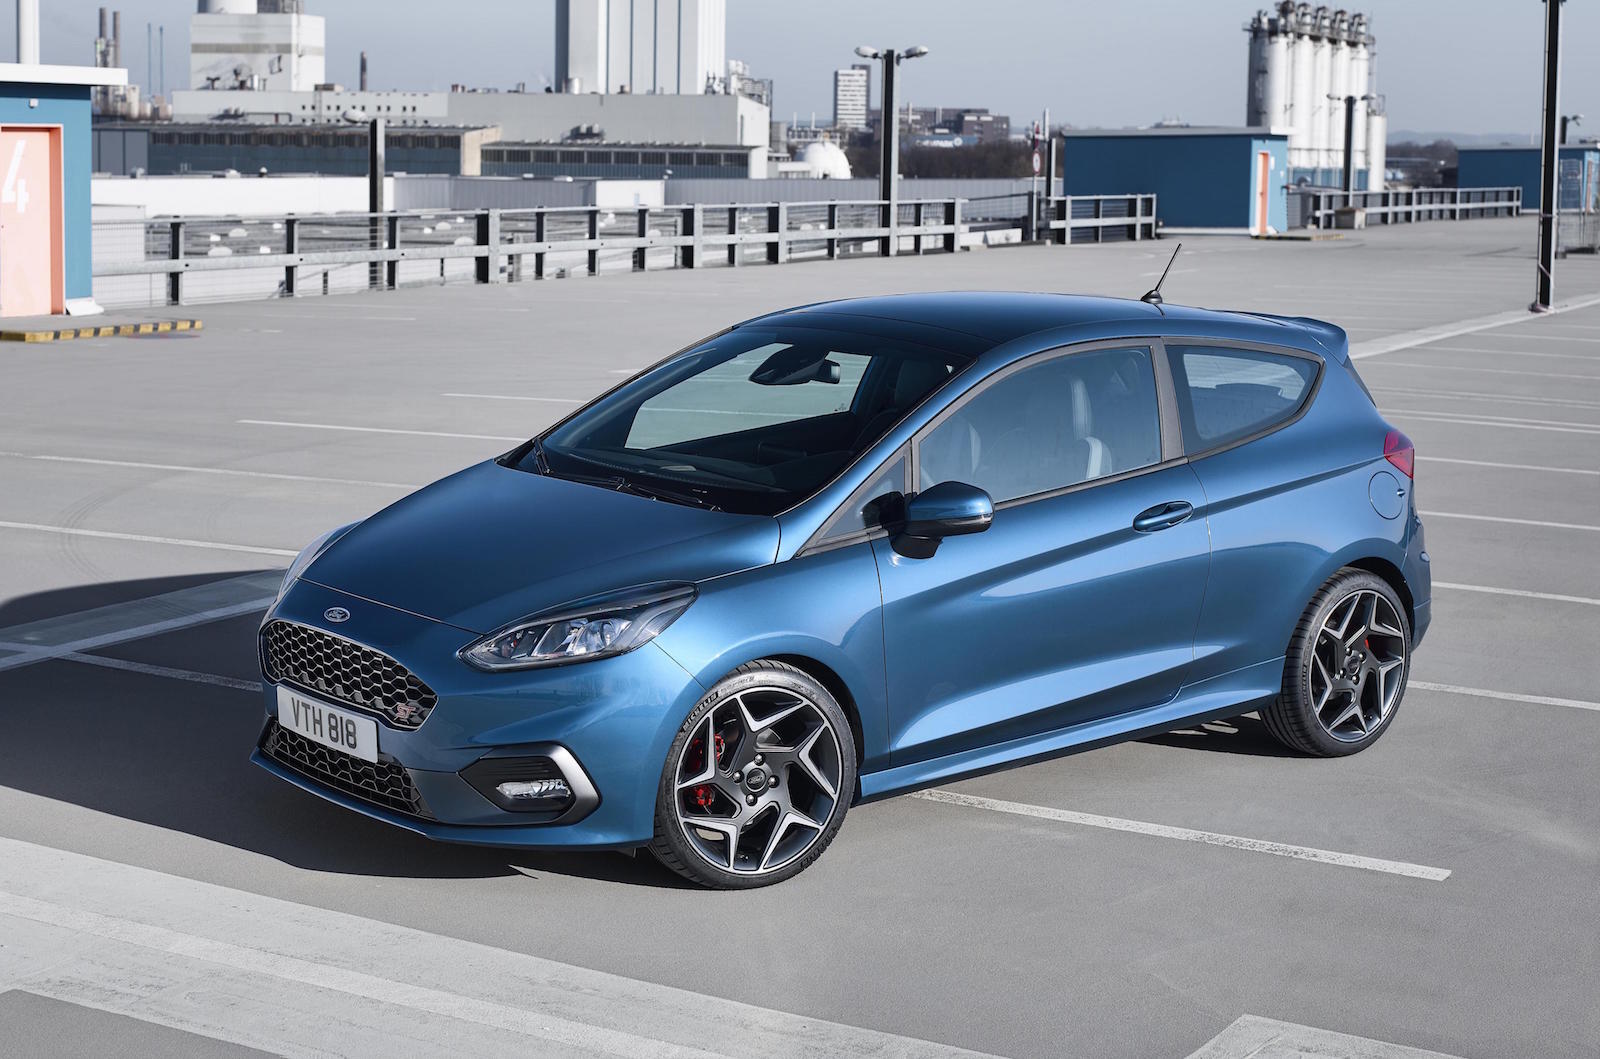 2017 Ford Fiesta ST officially revealed, gets 1.5T 3cyl